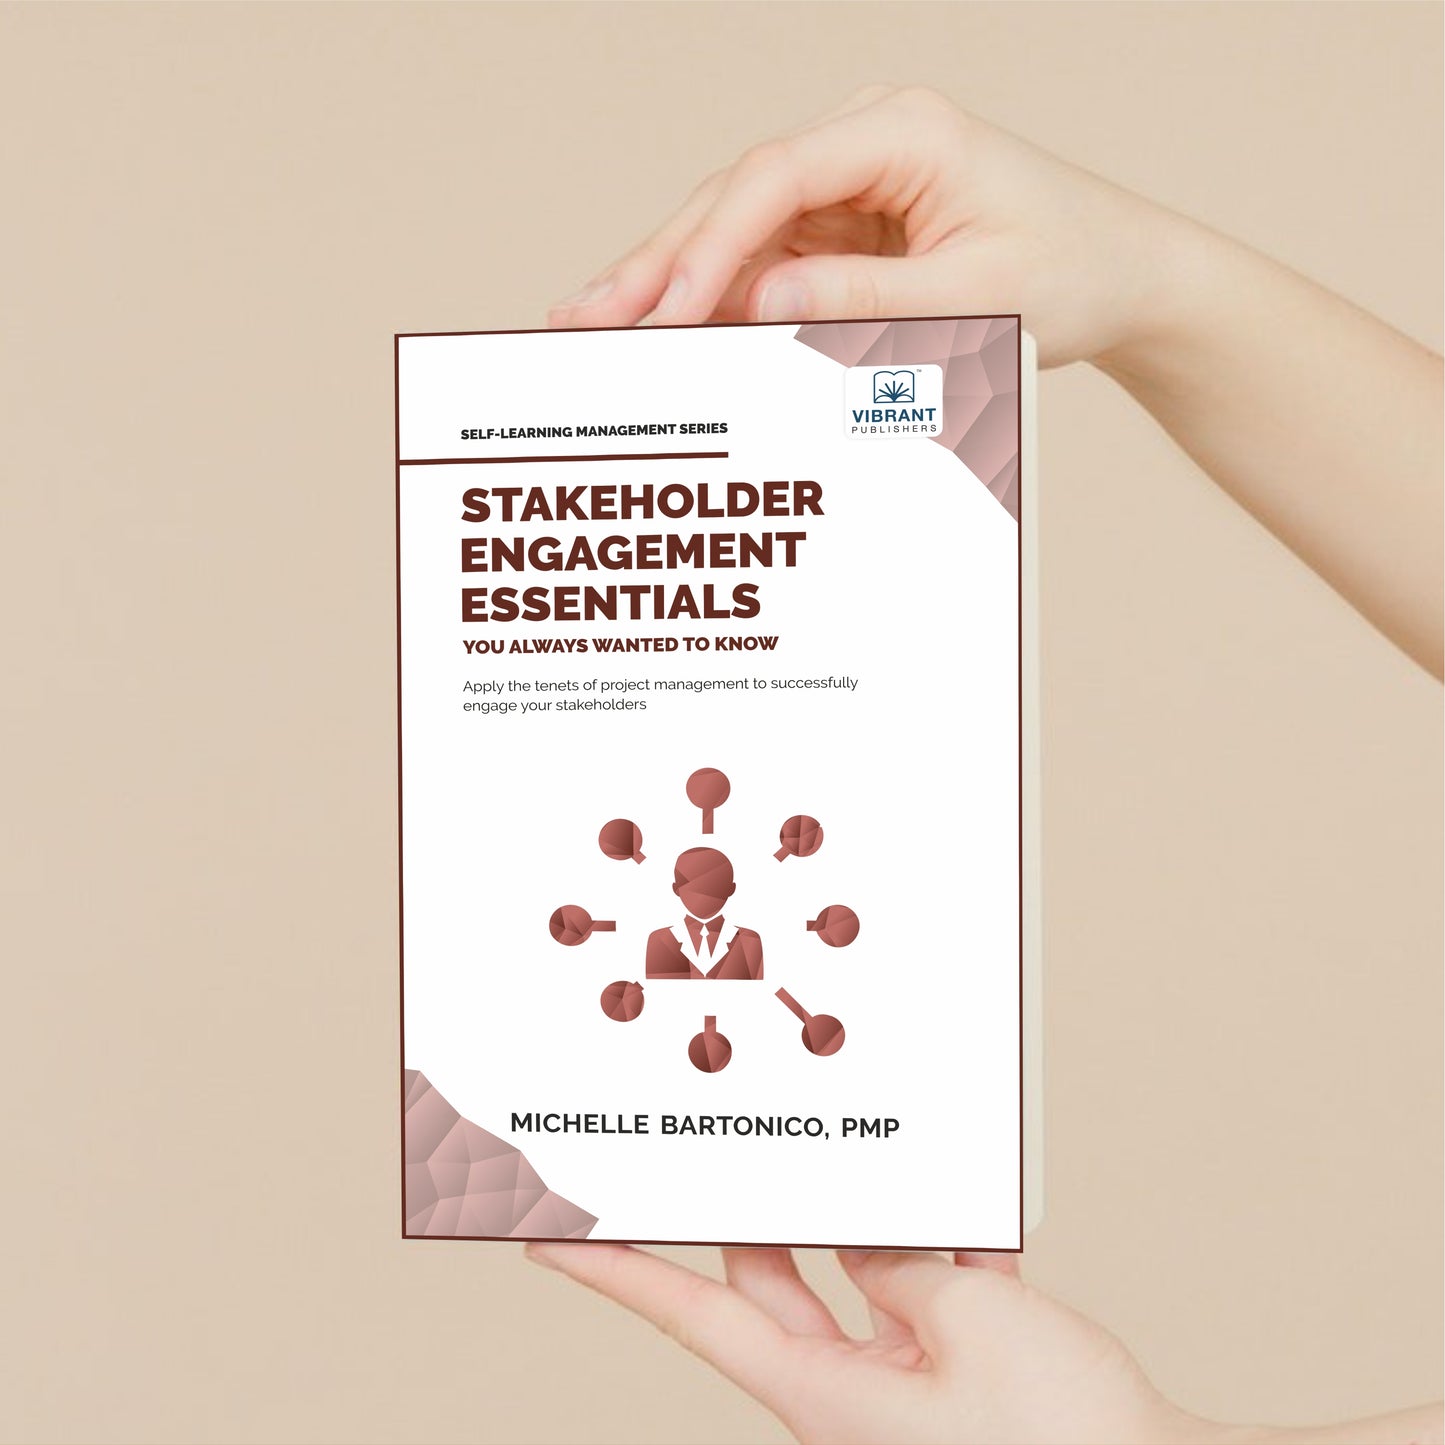 Stakeholder Engagement Essentials You Always Wanted To Know